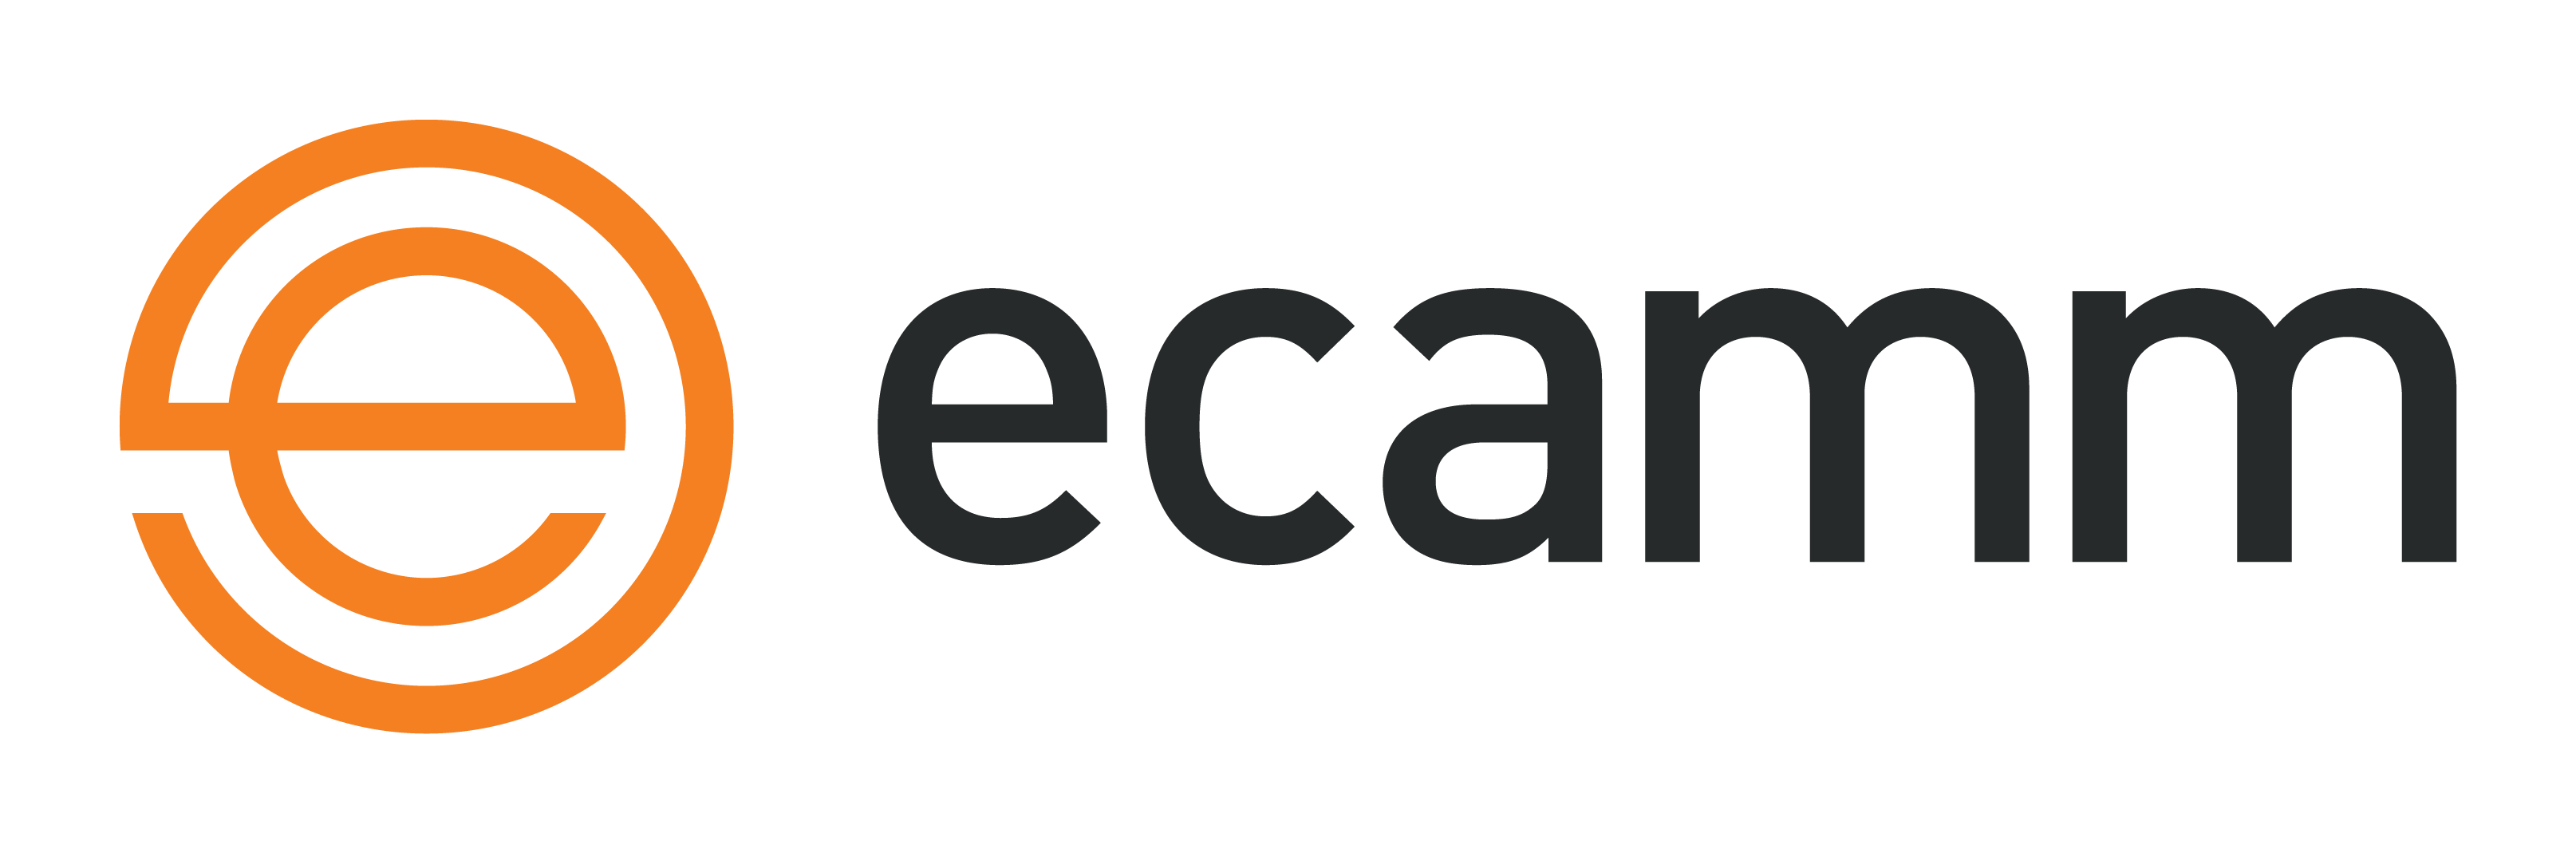 Ecamm Network logo. Orange logomark with lowercase e surrounded by an orange circle border. To the right is the Ecamm name in black lowercase letters